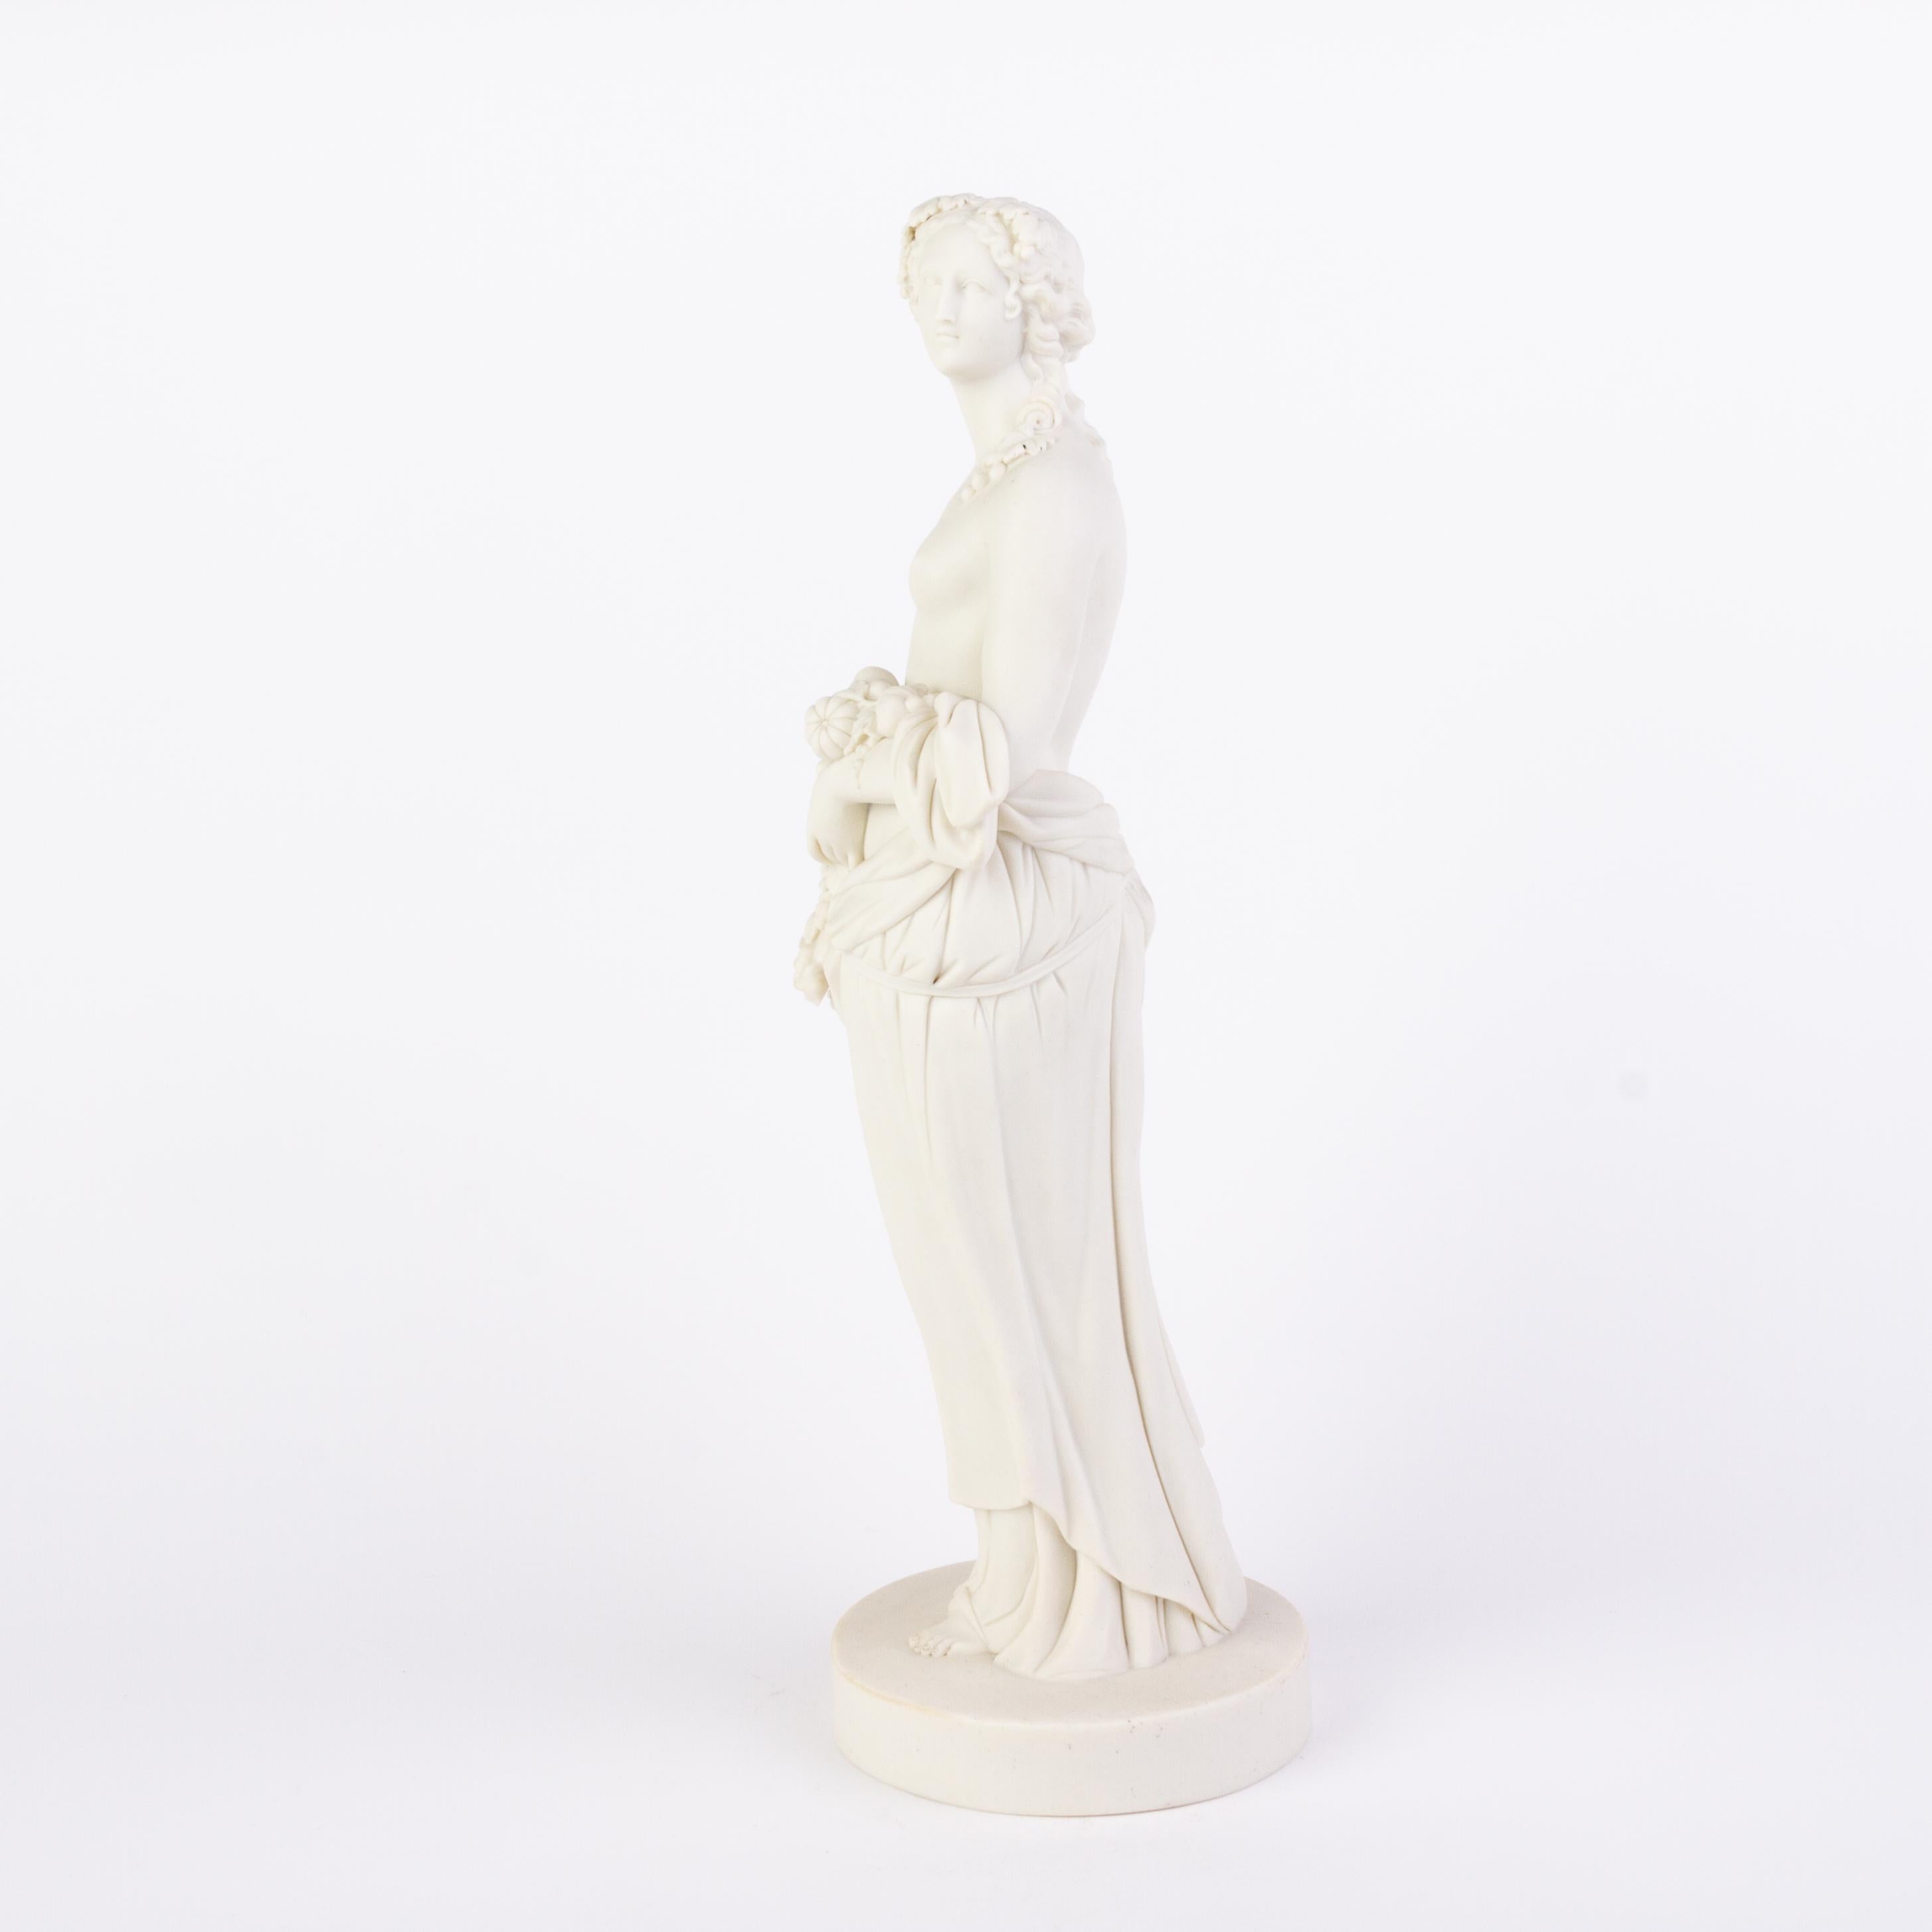 Porcelain English Victorian Copeland Parian Ware Statue of Spring 19th Century For Sale